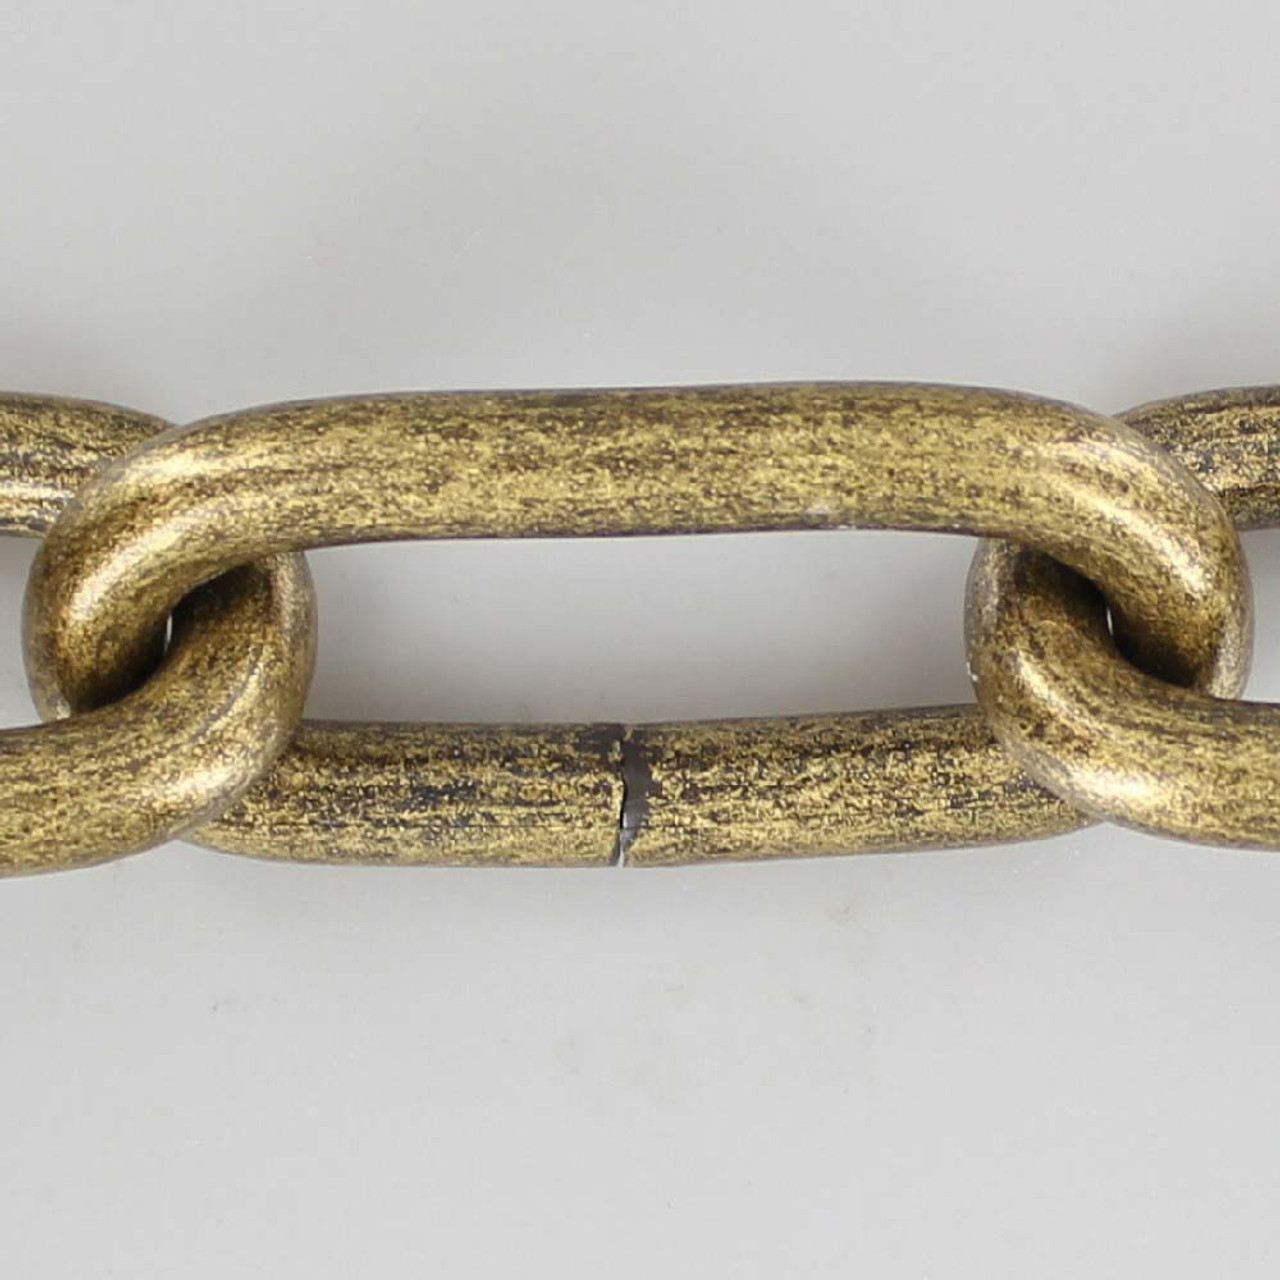 Chain - Antique Brass Finish - 1/8 Thick